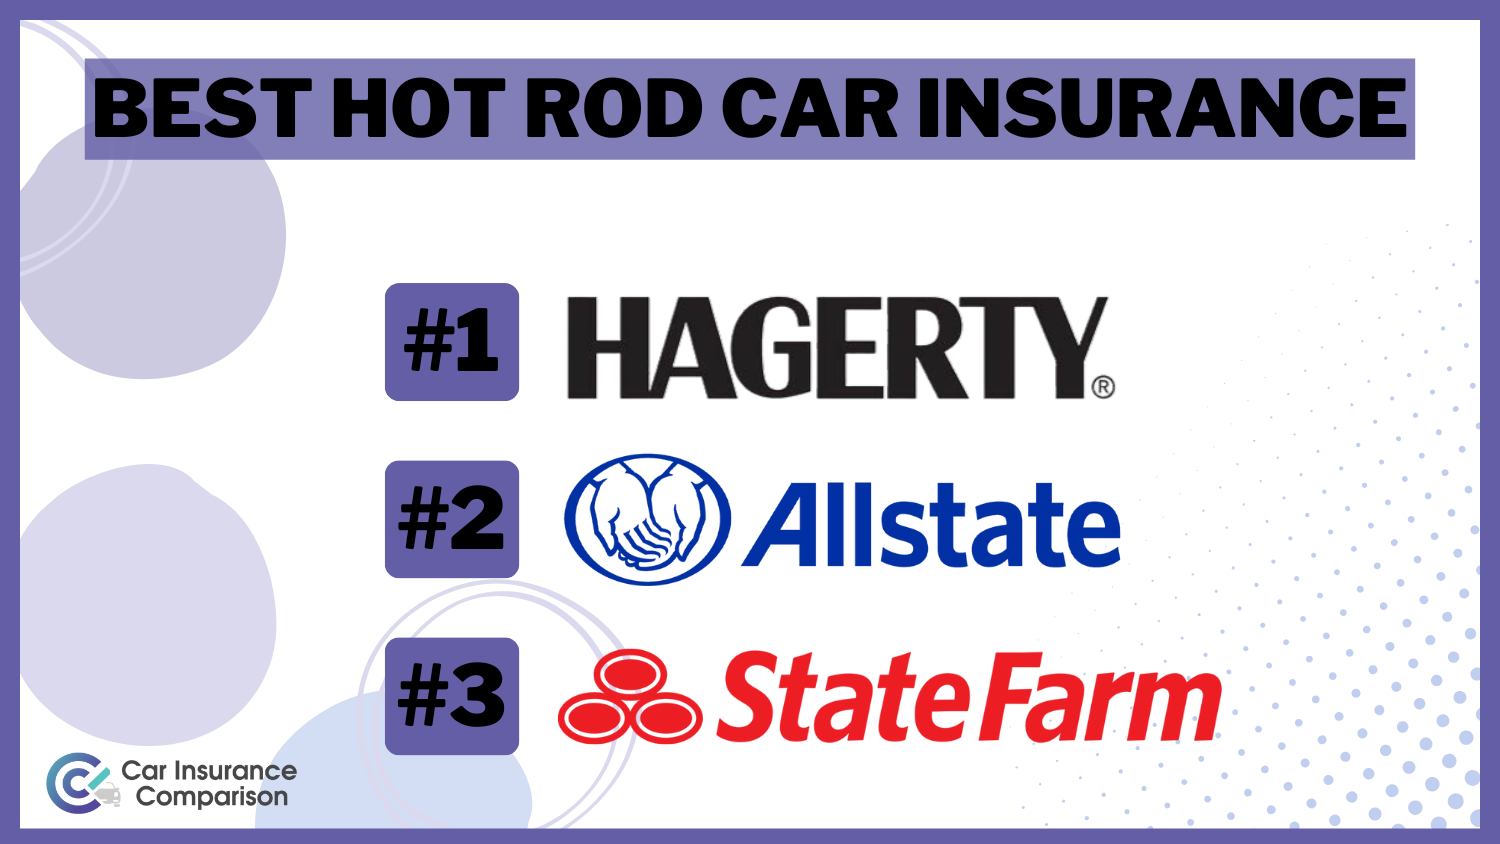 Best Hot Rod Car Insurance - Hagerty, Allstate, State Farm